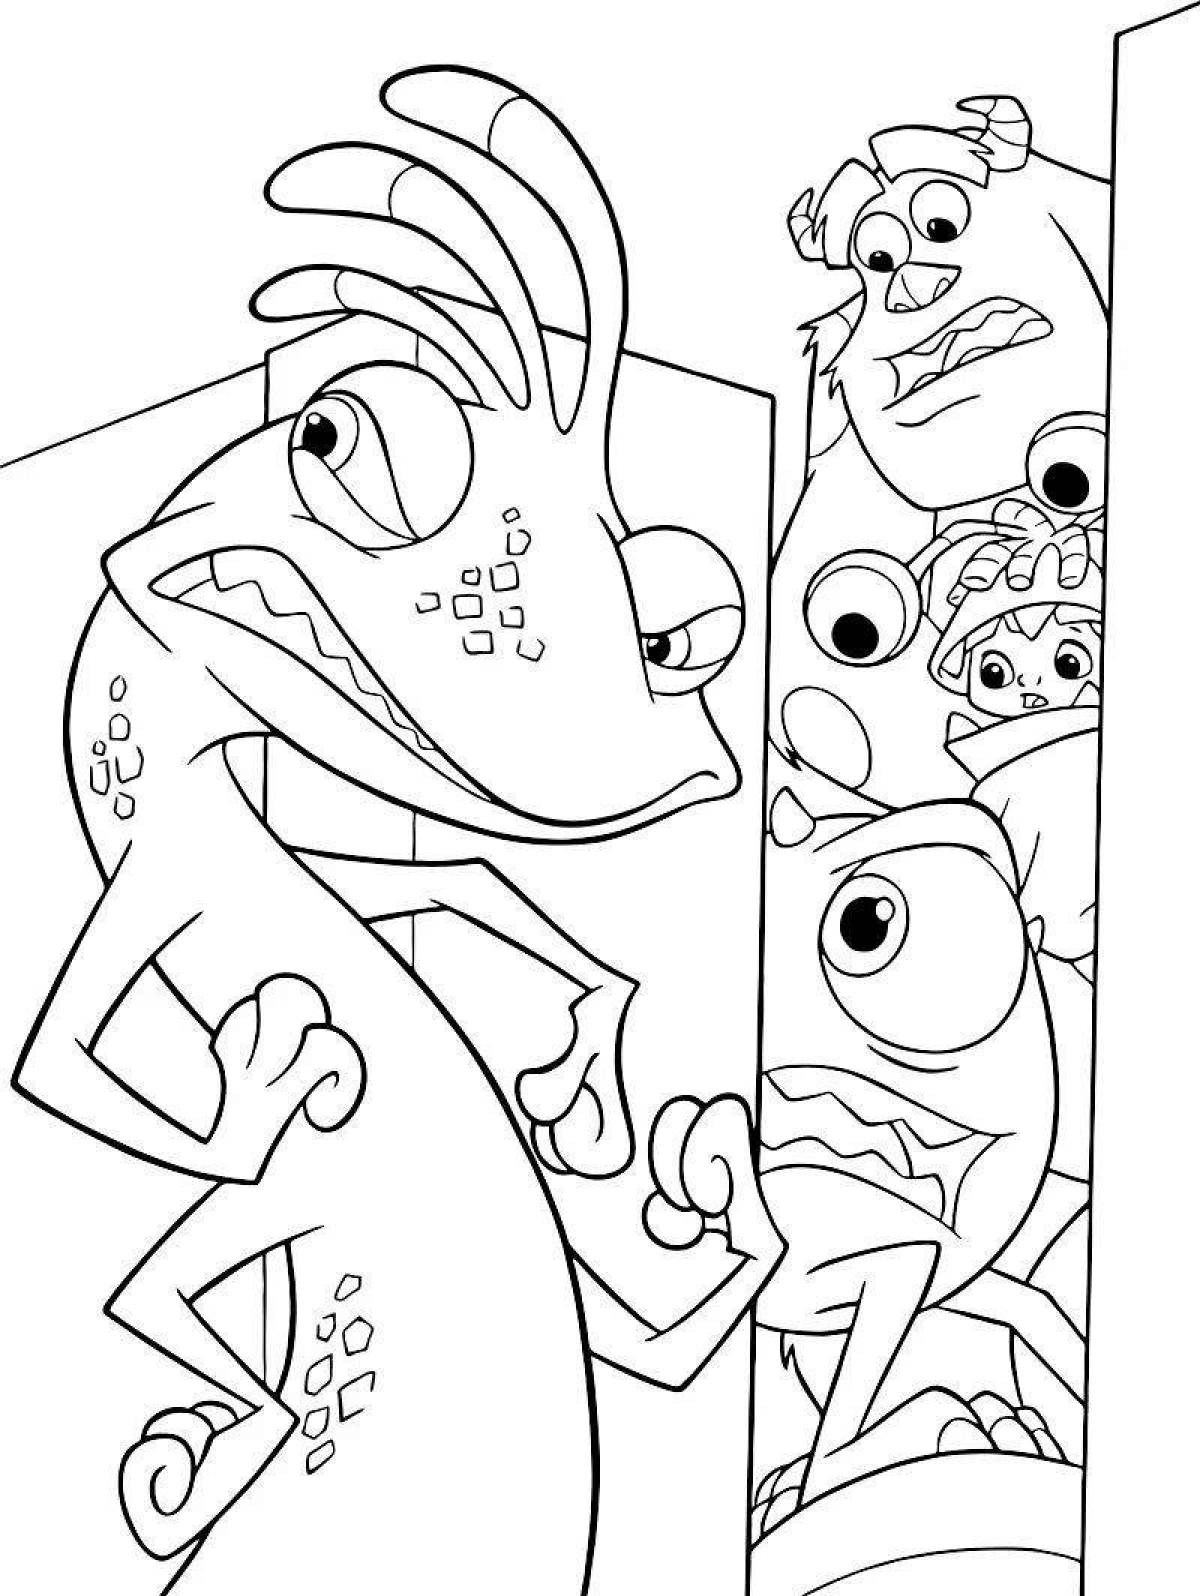 Colorful monsters corporation coloring book for kids